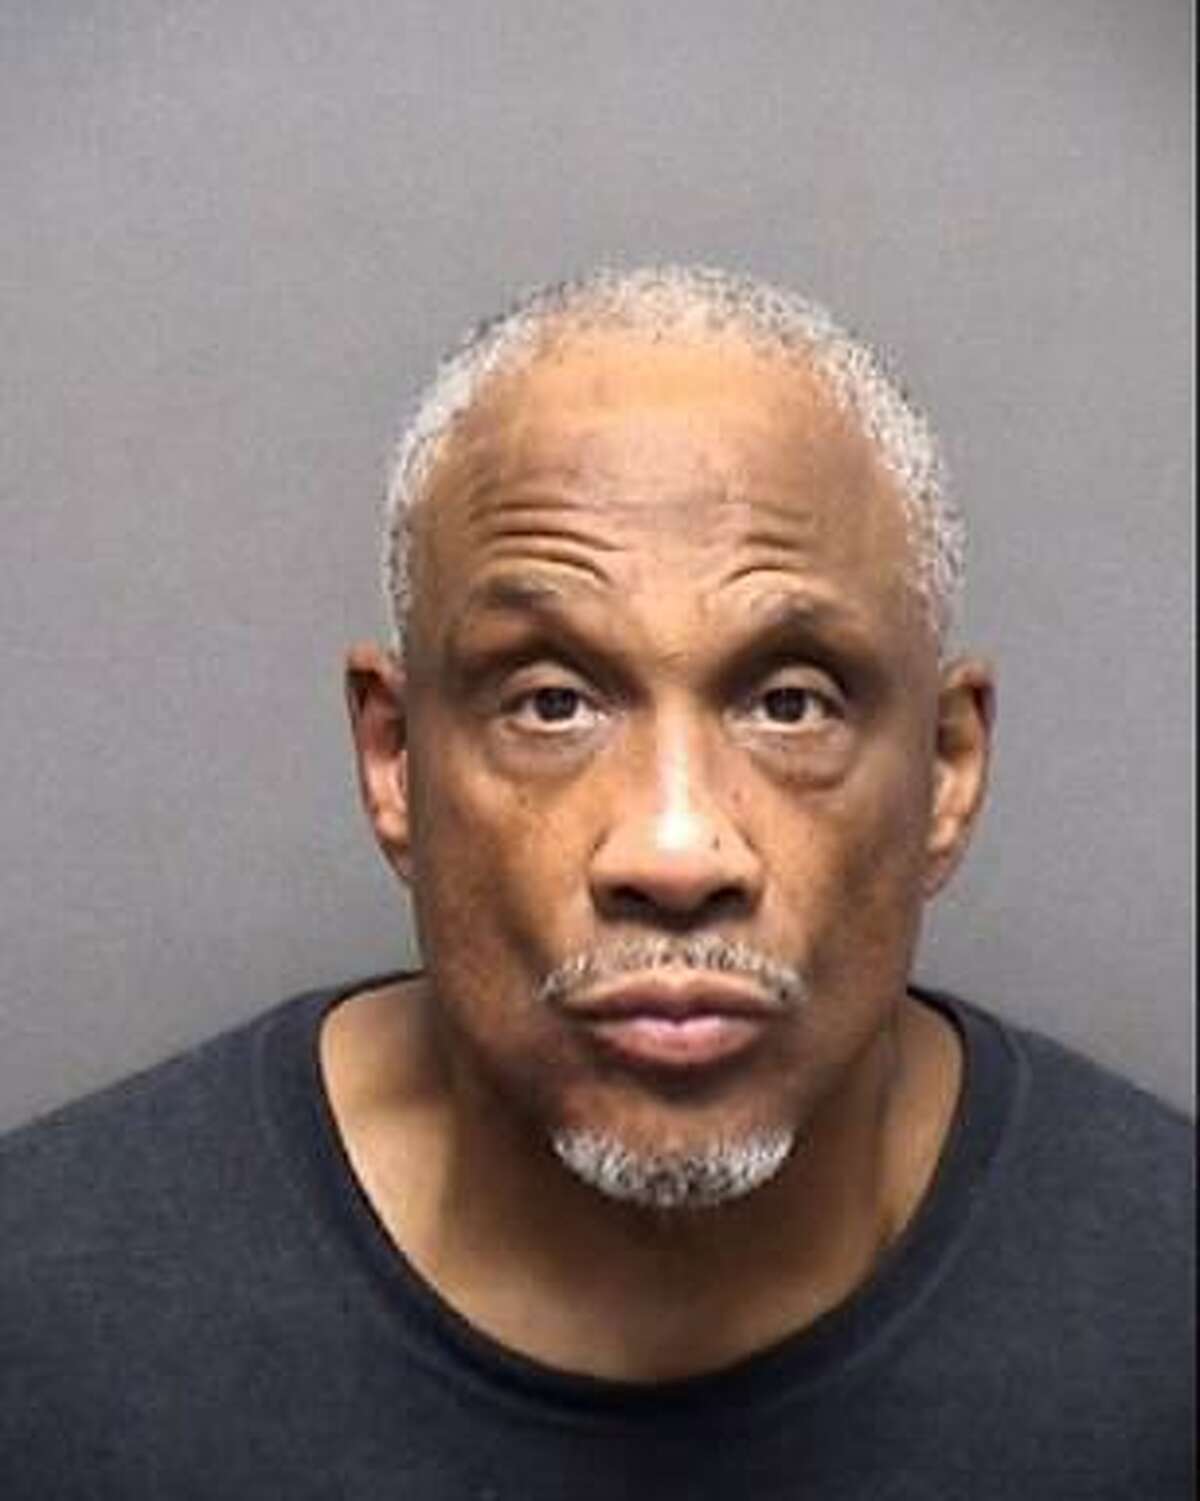 Gary Franz DeVaughn, 59, was found guilty following a jury trial in April for charges of attempted aggravated sexual assault and aggravated assault with a deadly weapon.